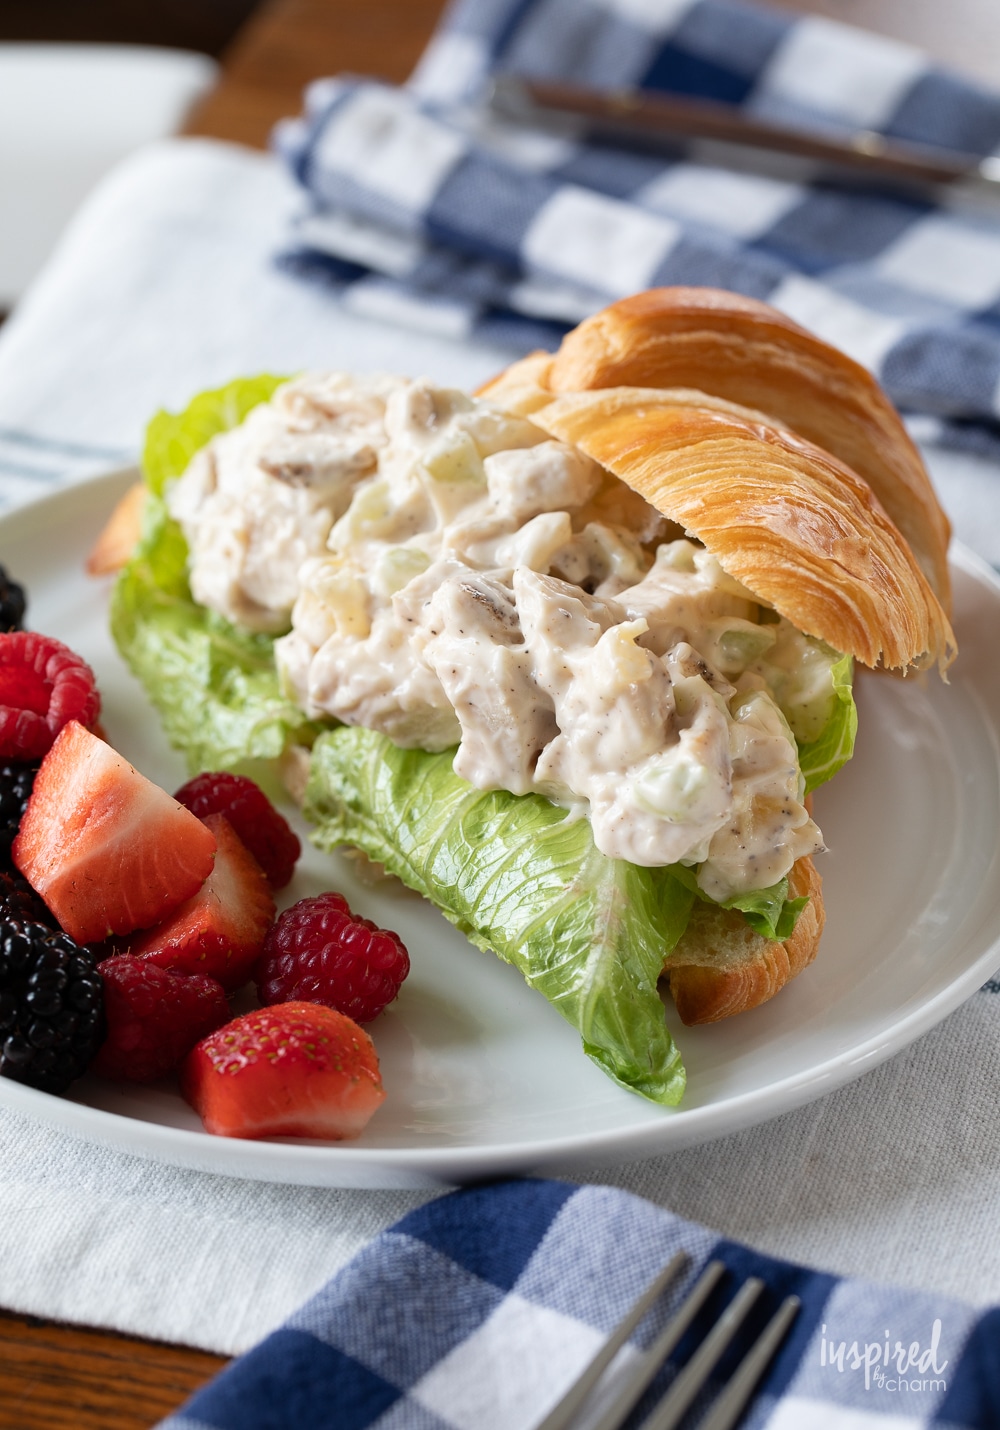 chicken salad sandwich served with fruit on a plate.